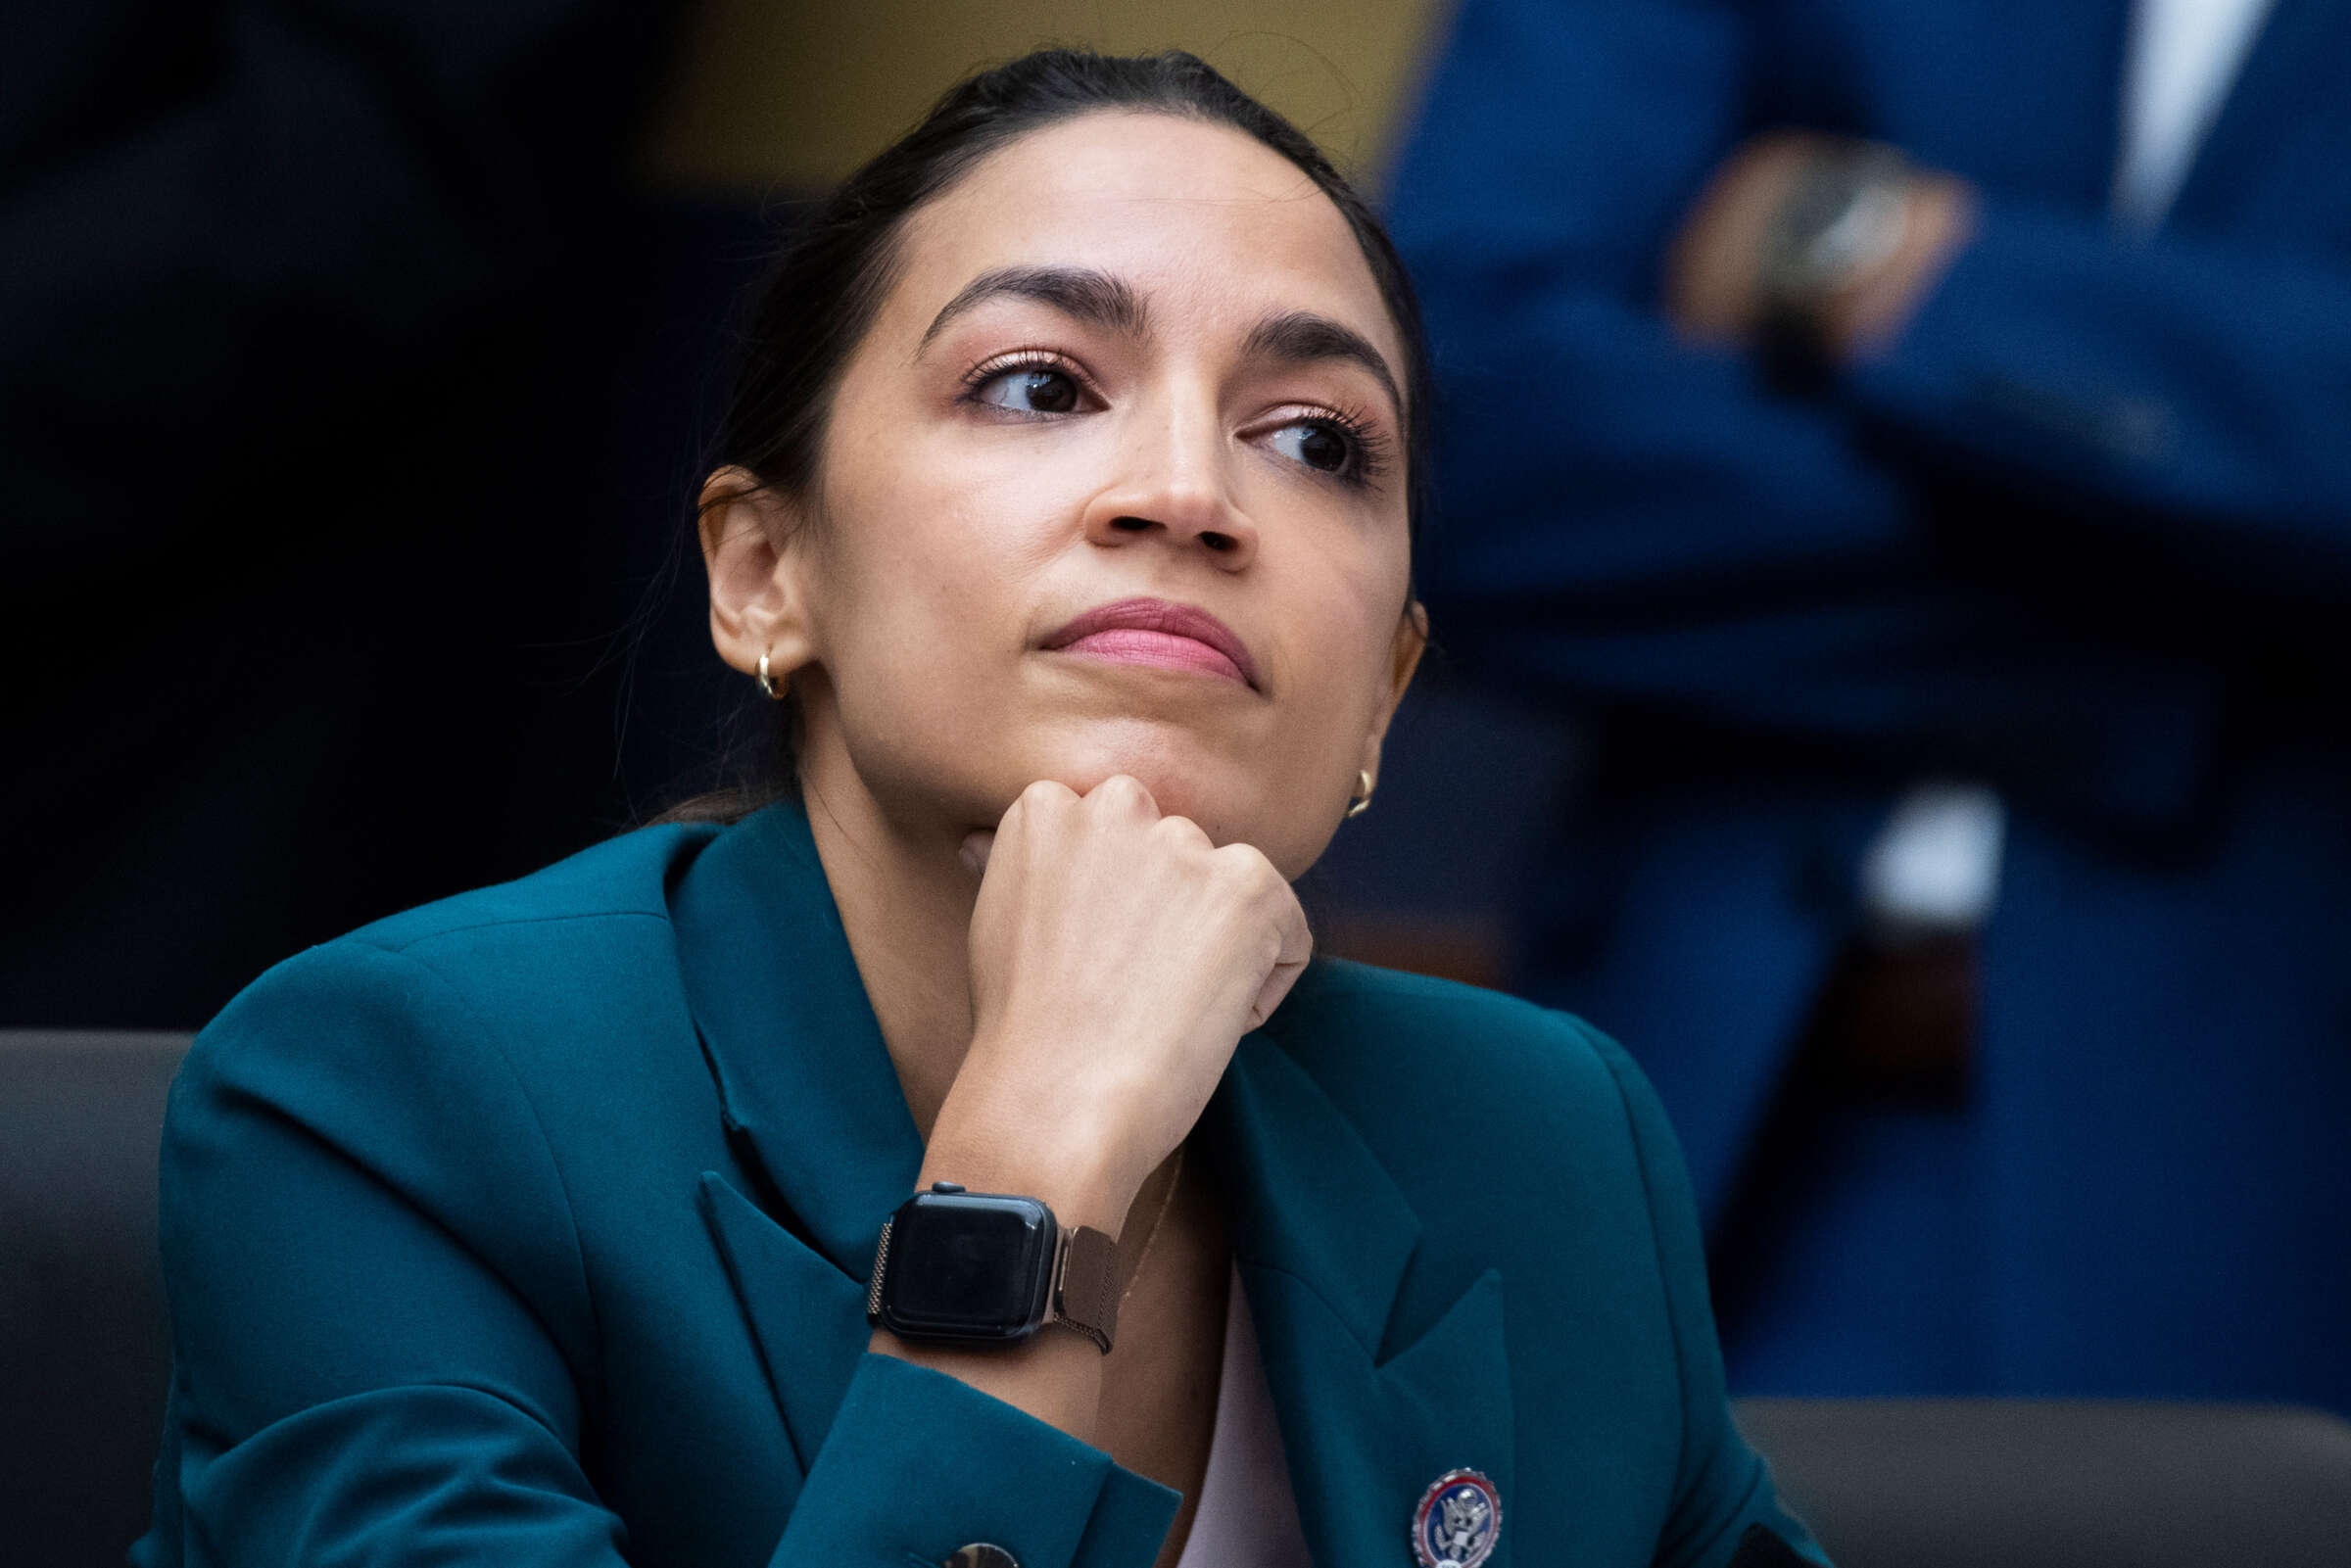 “Lay Off the Proto-Fascism”: AOC Flames Musk for Banning Accounts on Twitter (truthout.org)